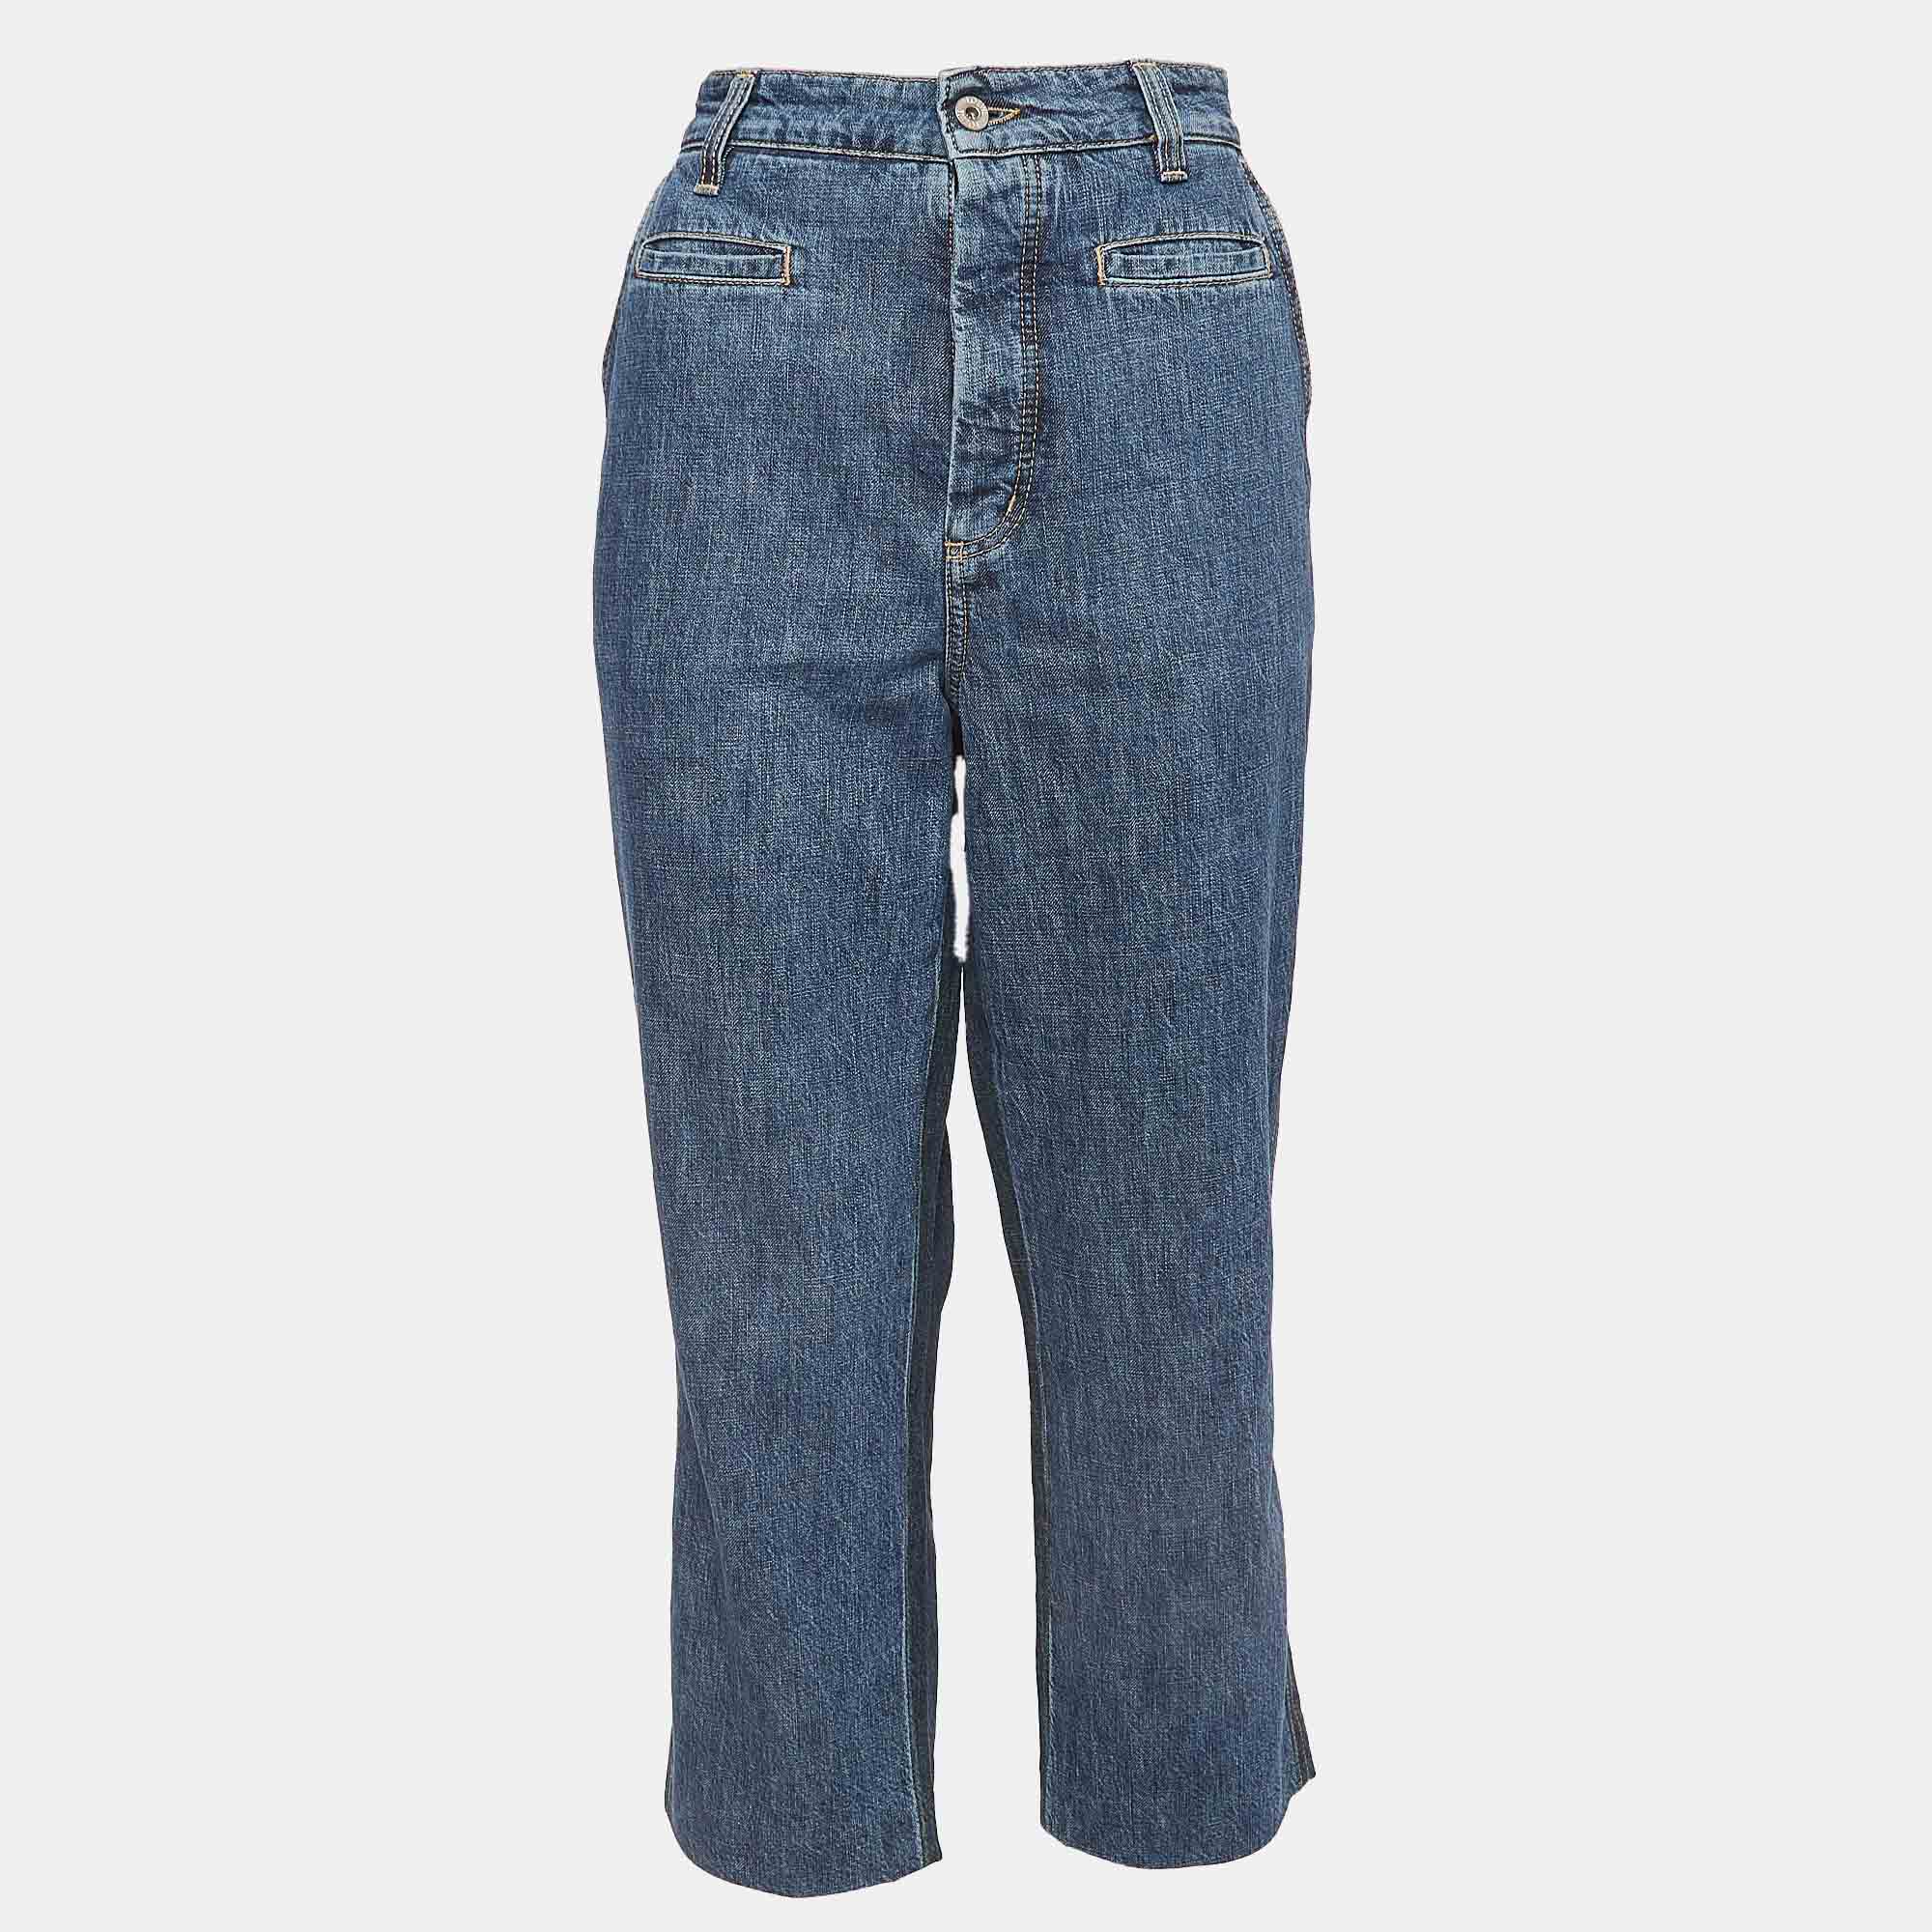 

Loewe Blue Washed Denim Buttoned Jeans M Waist 30"